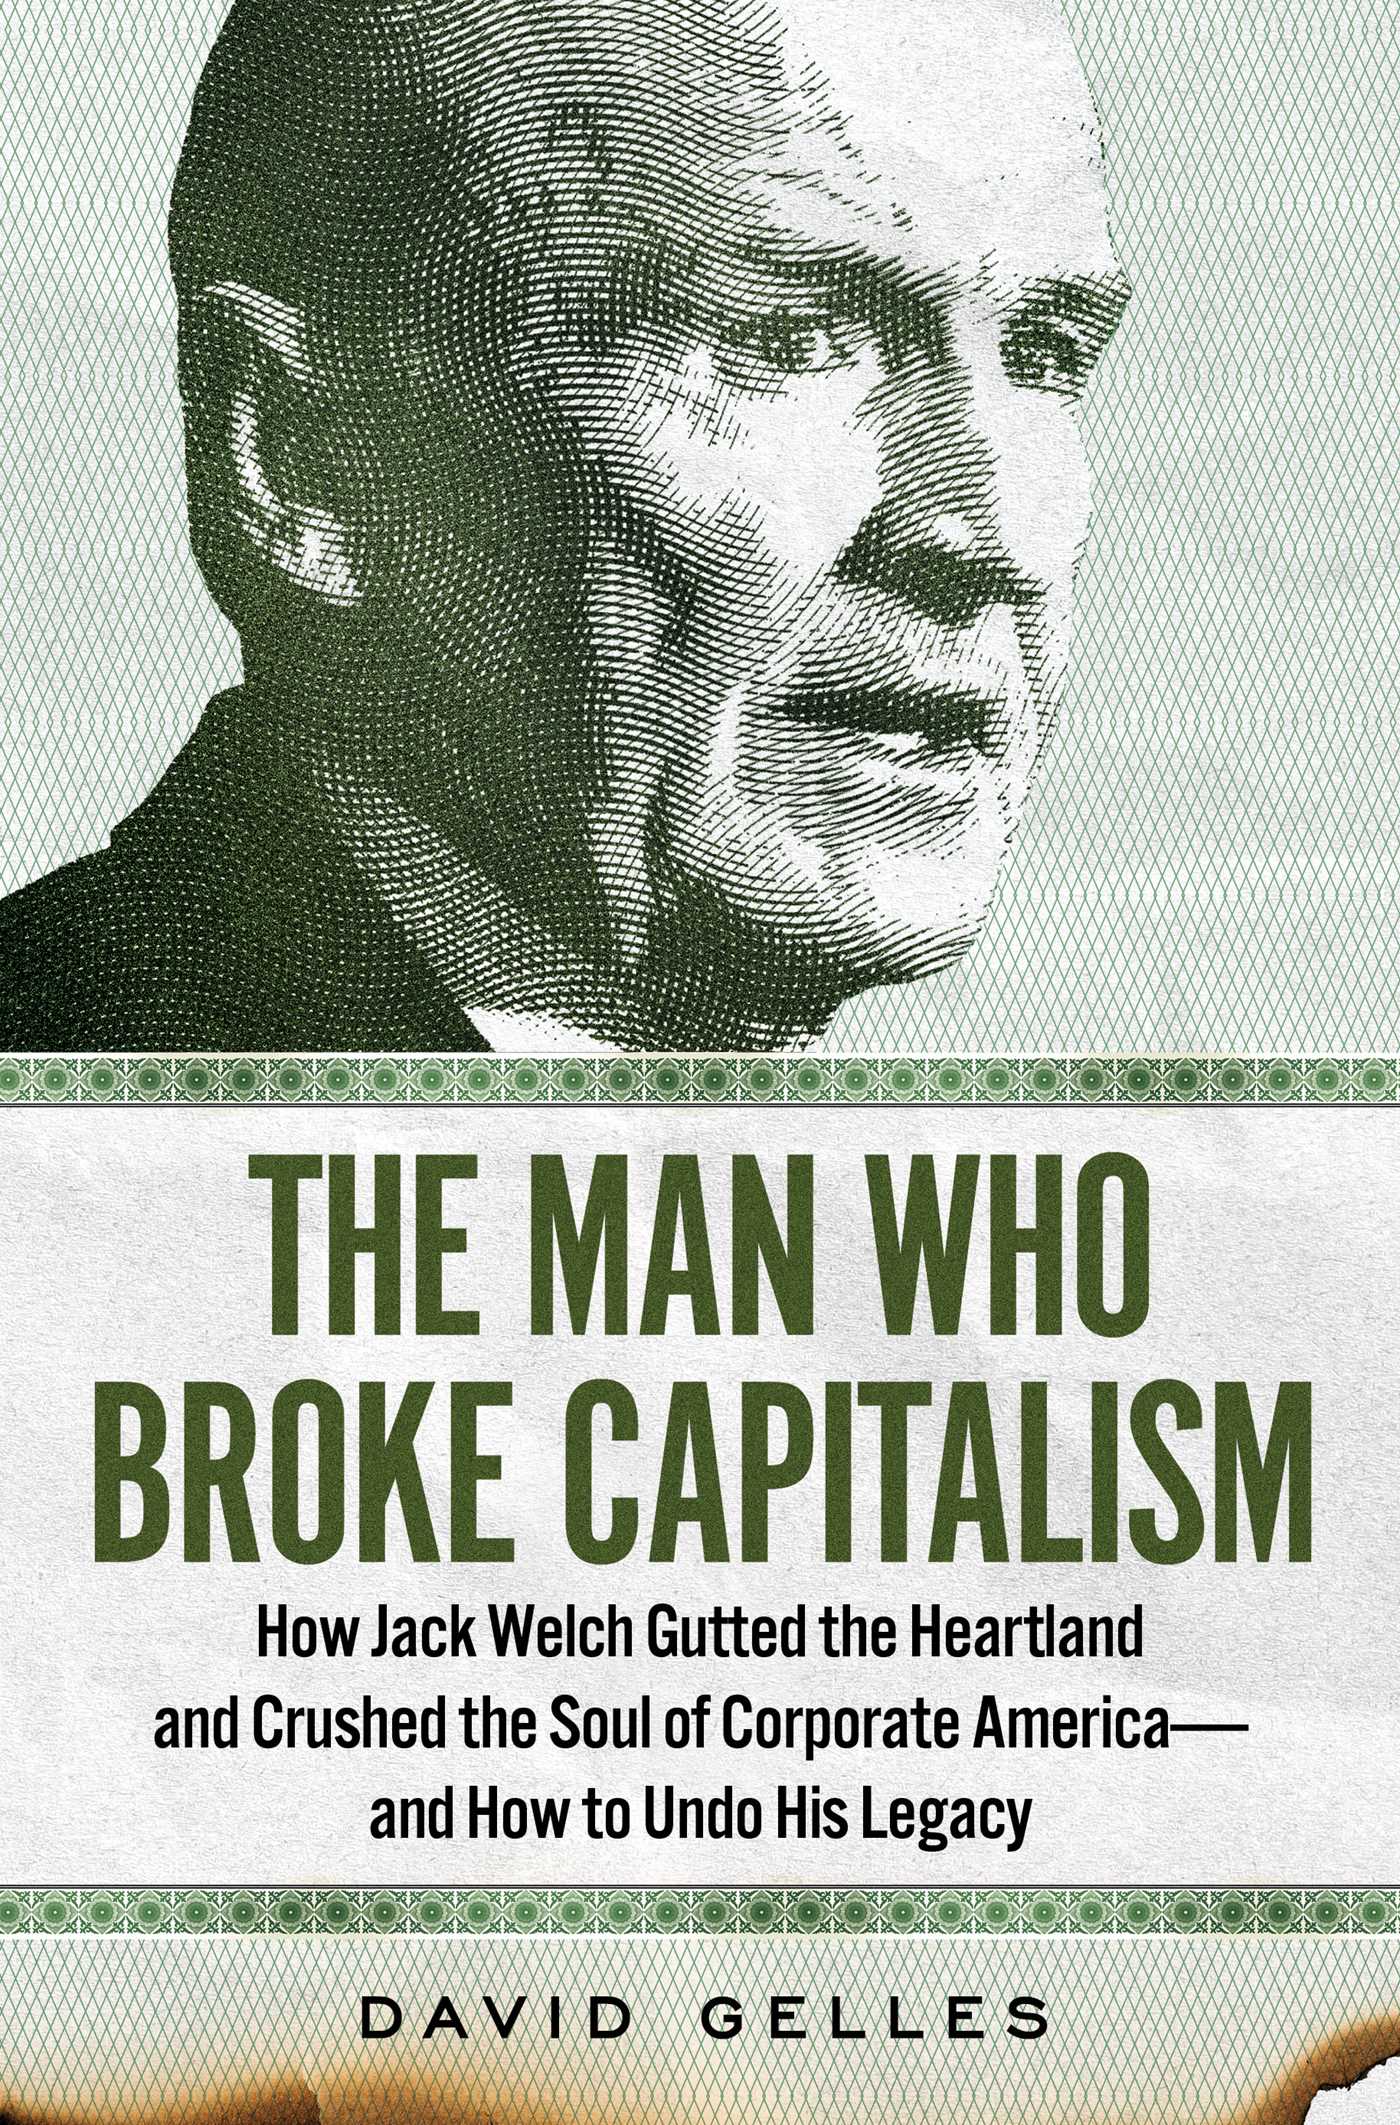 The Man Who Broke Capitalism by David Gelles released a week from today